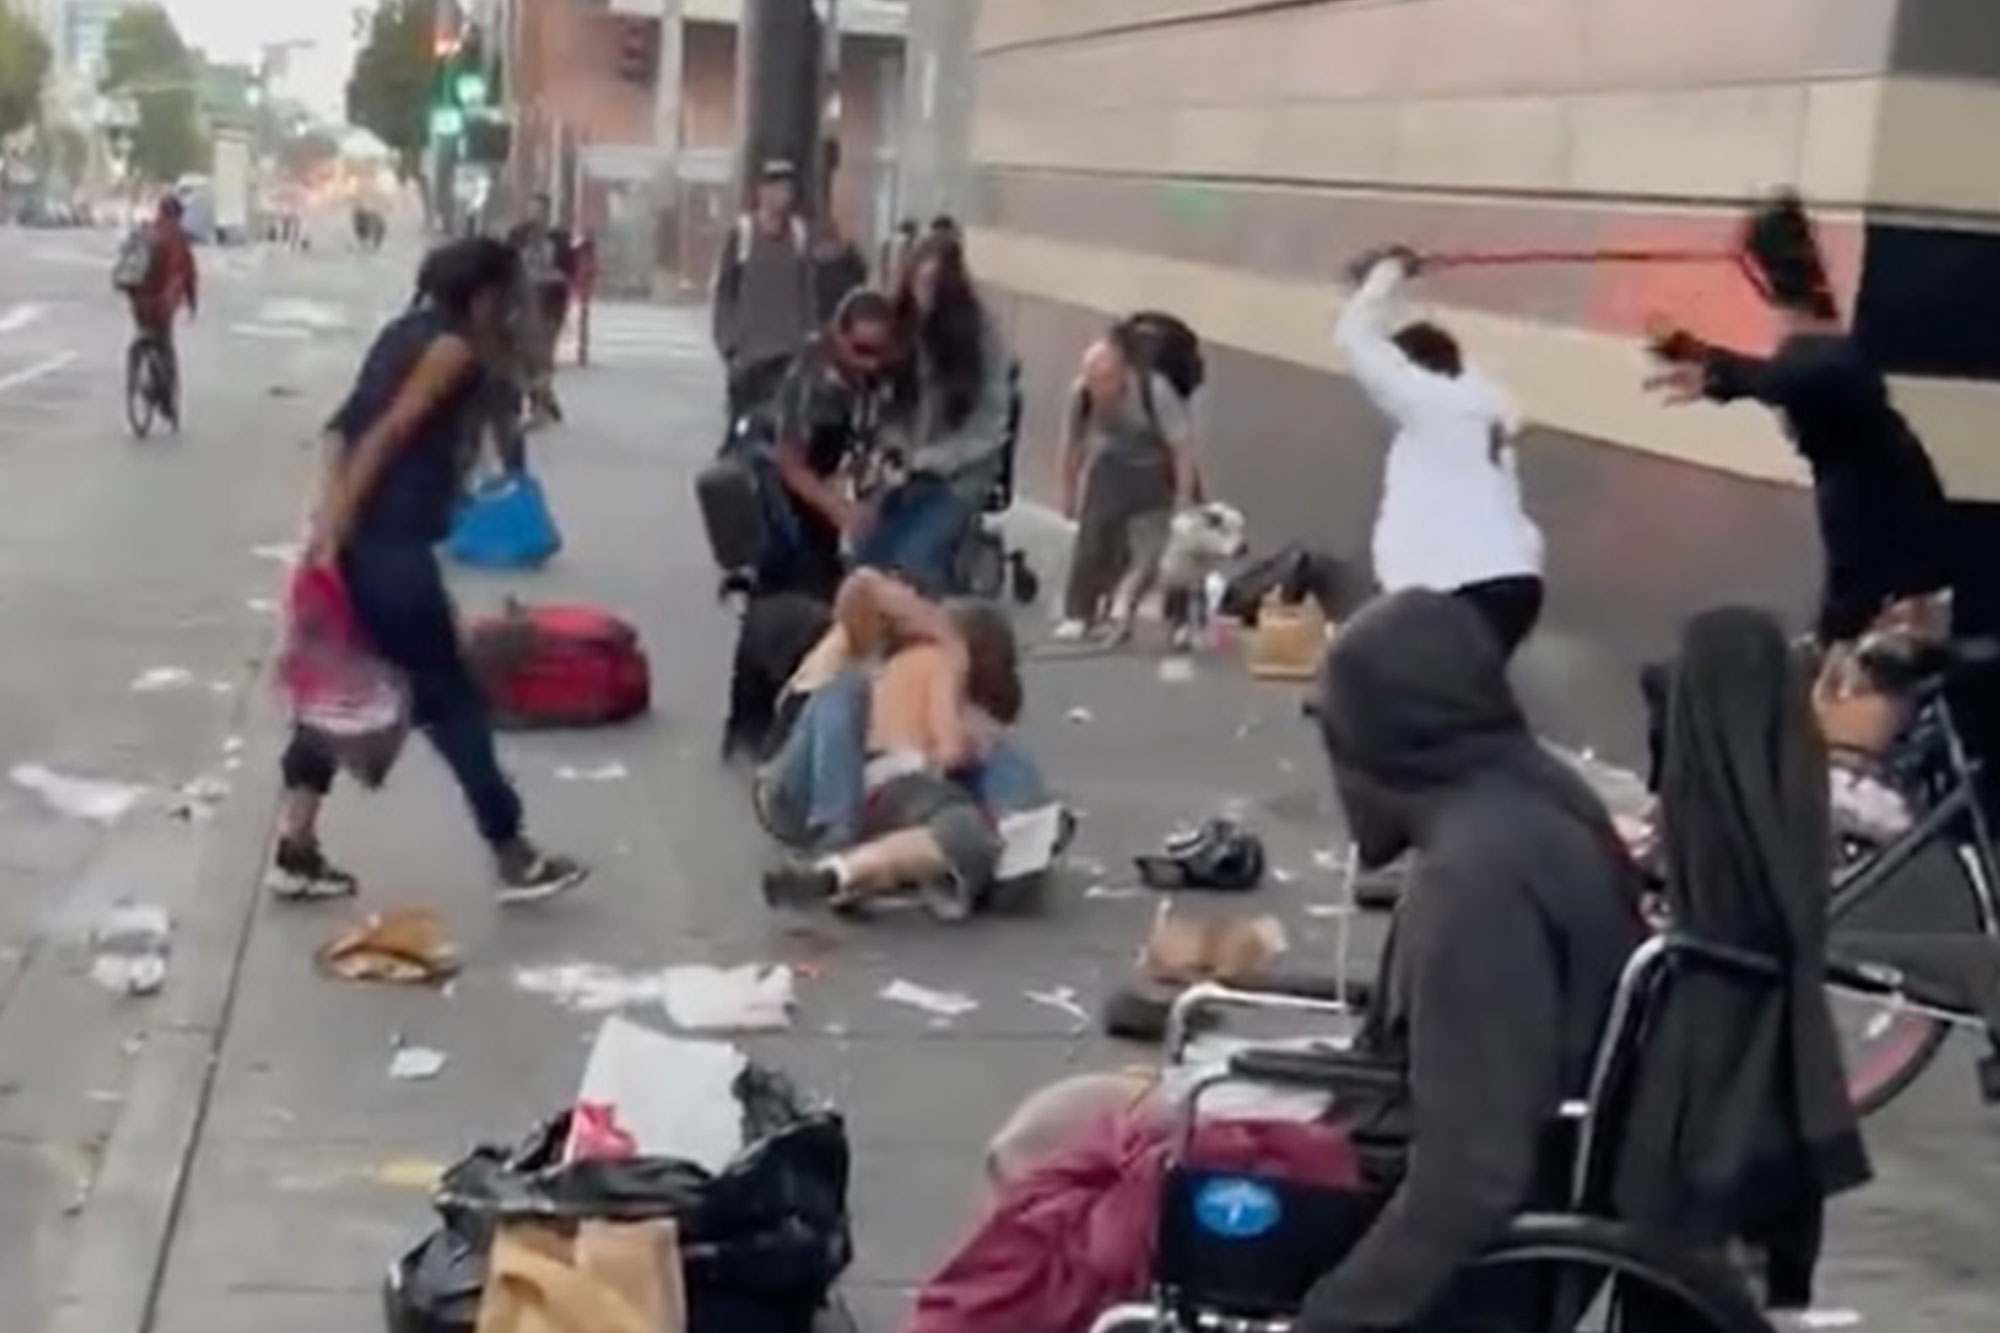 Two homeless men wrestle on the ground, while a third whacks one of them with a broom.